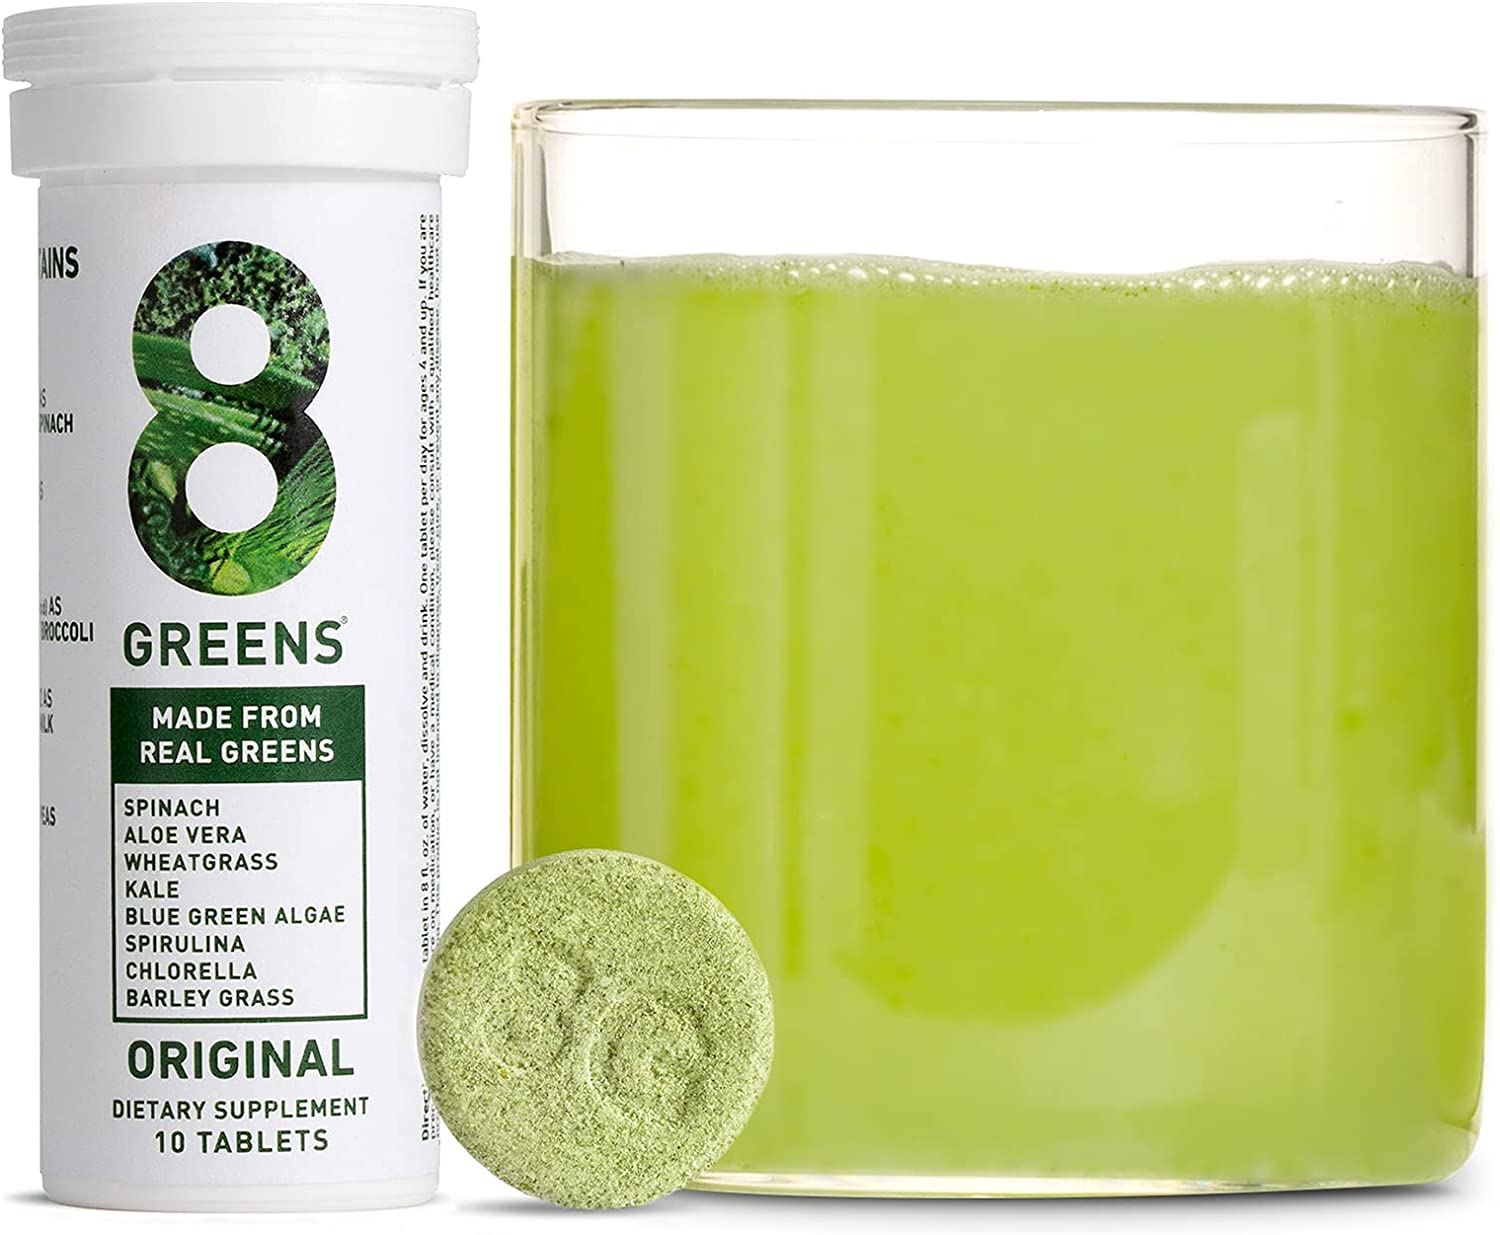 8greens tablets and green drink